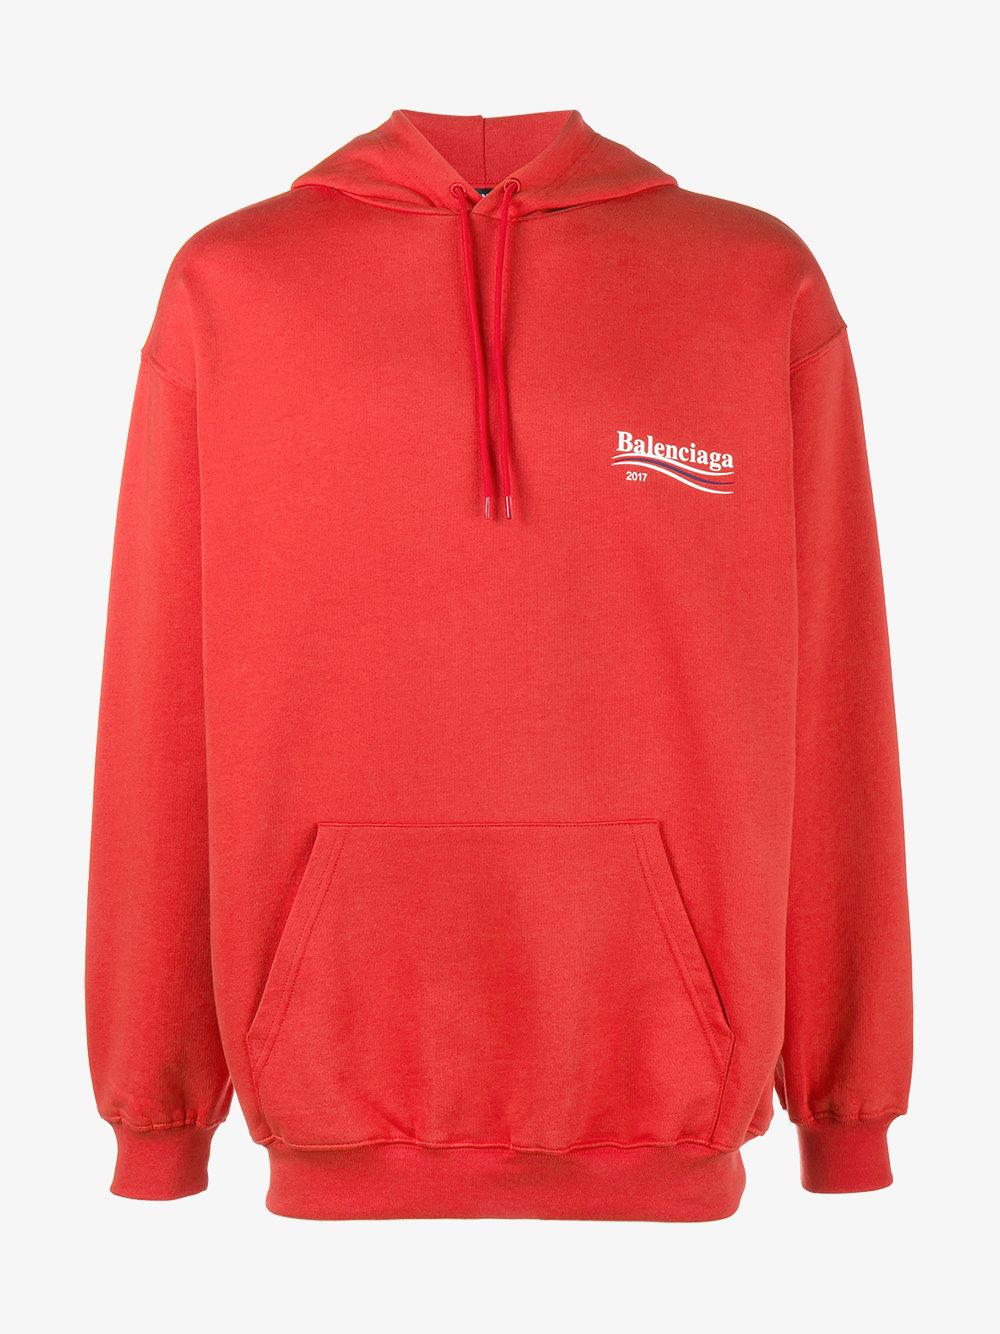 Lyst - Balenciaga Campaign Oversized Hoodie in Red for Men